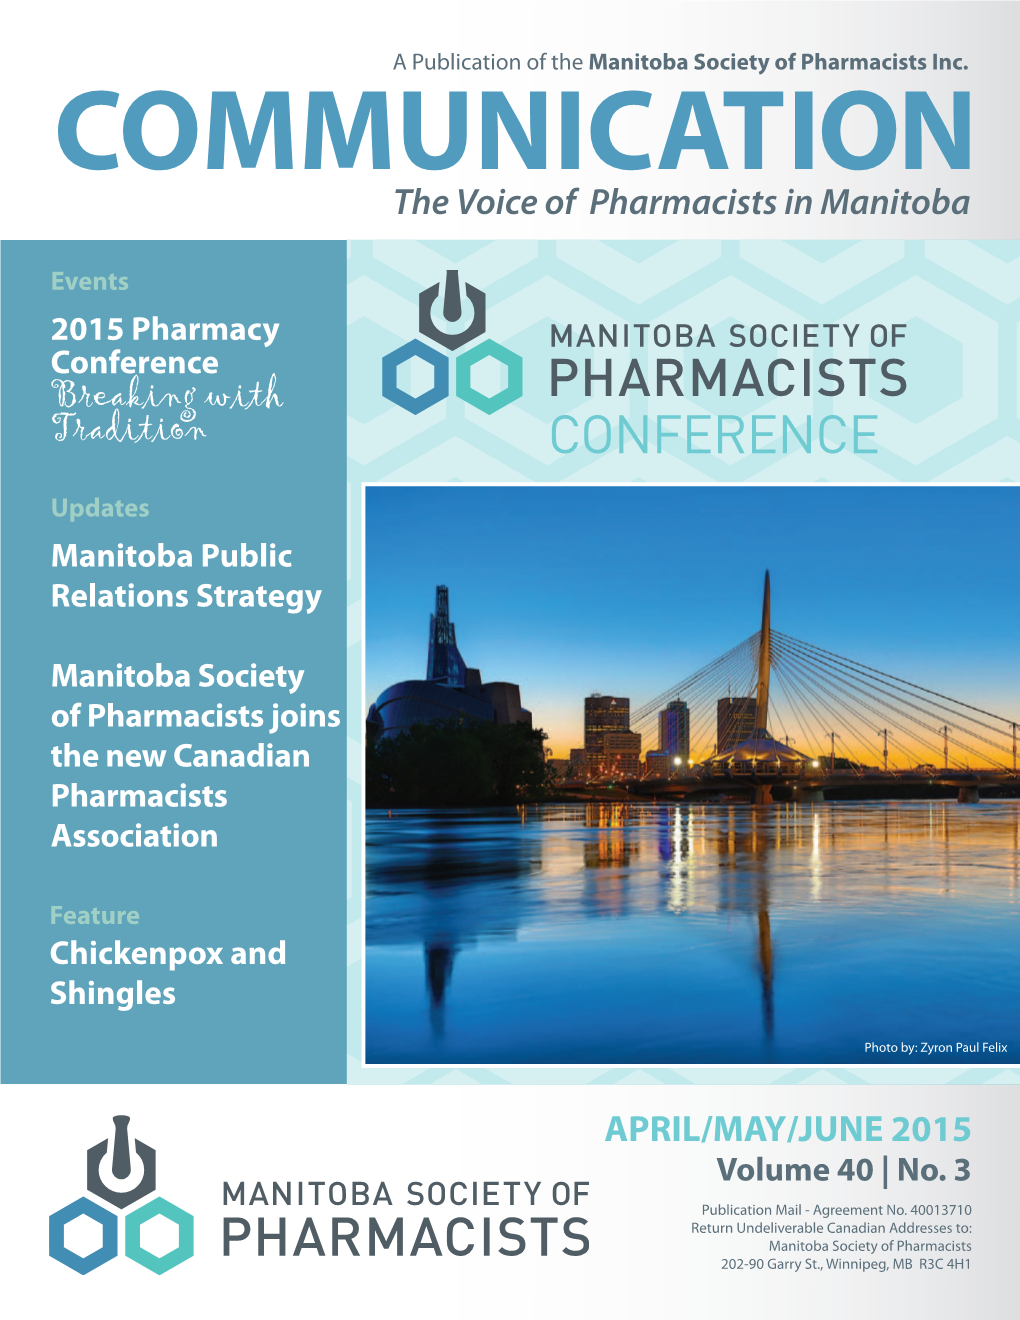 The Manitoba Pharmacy Conference